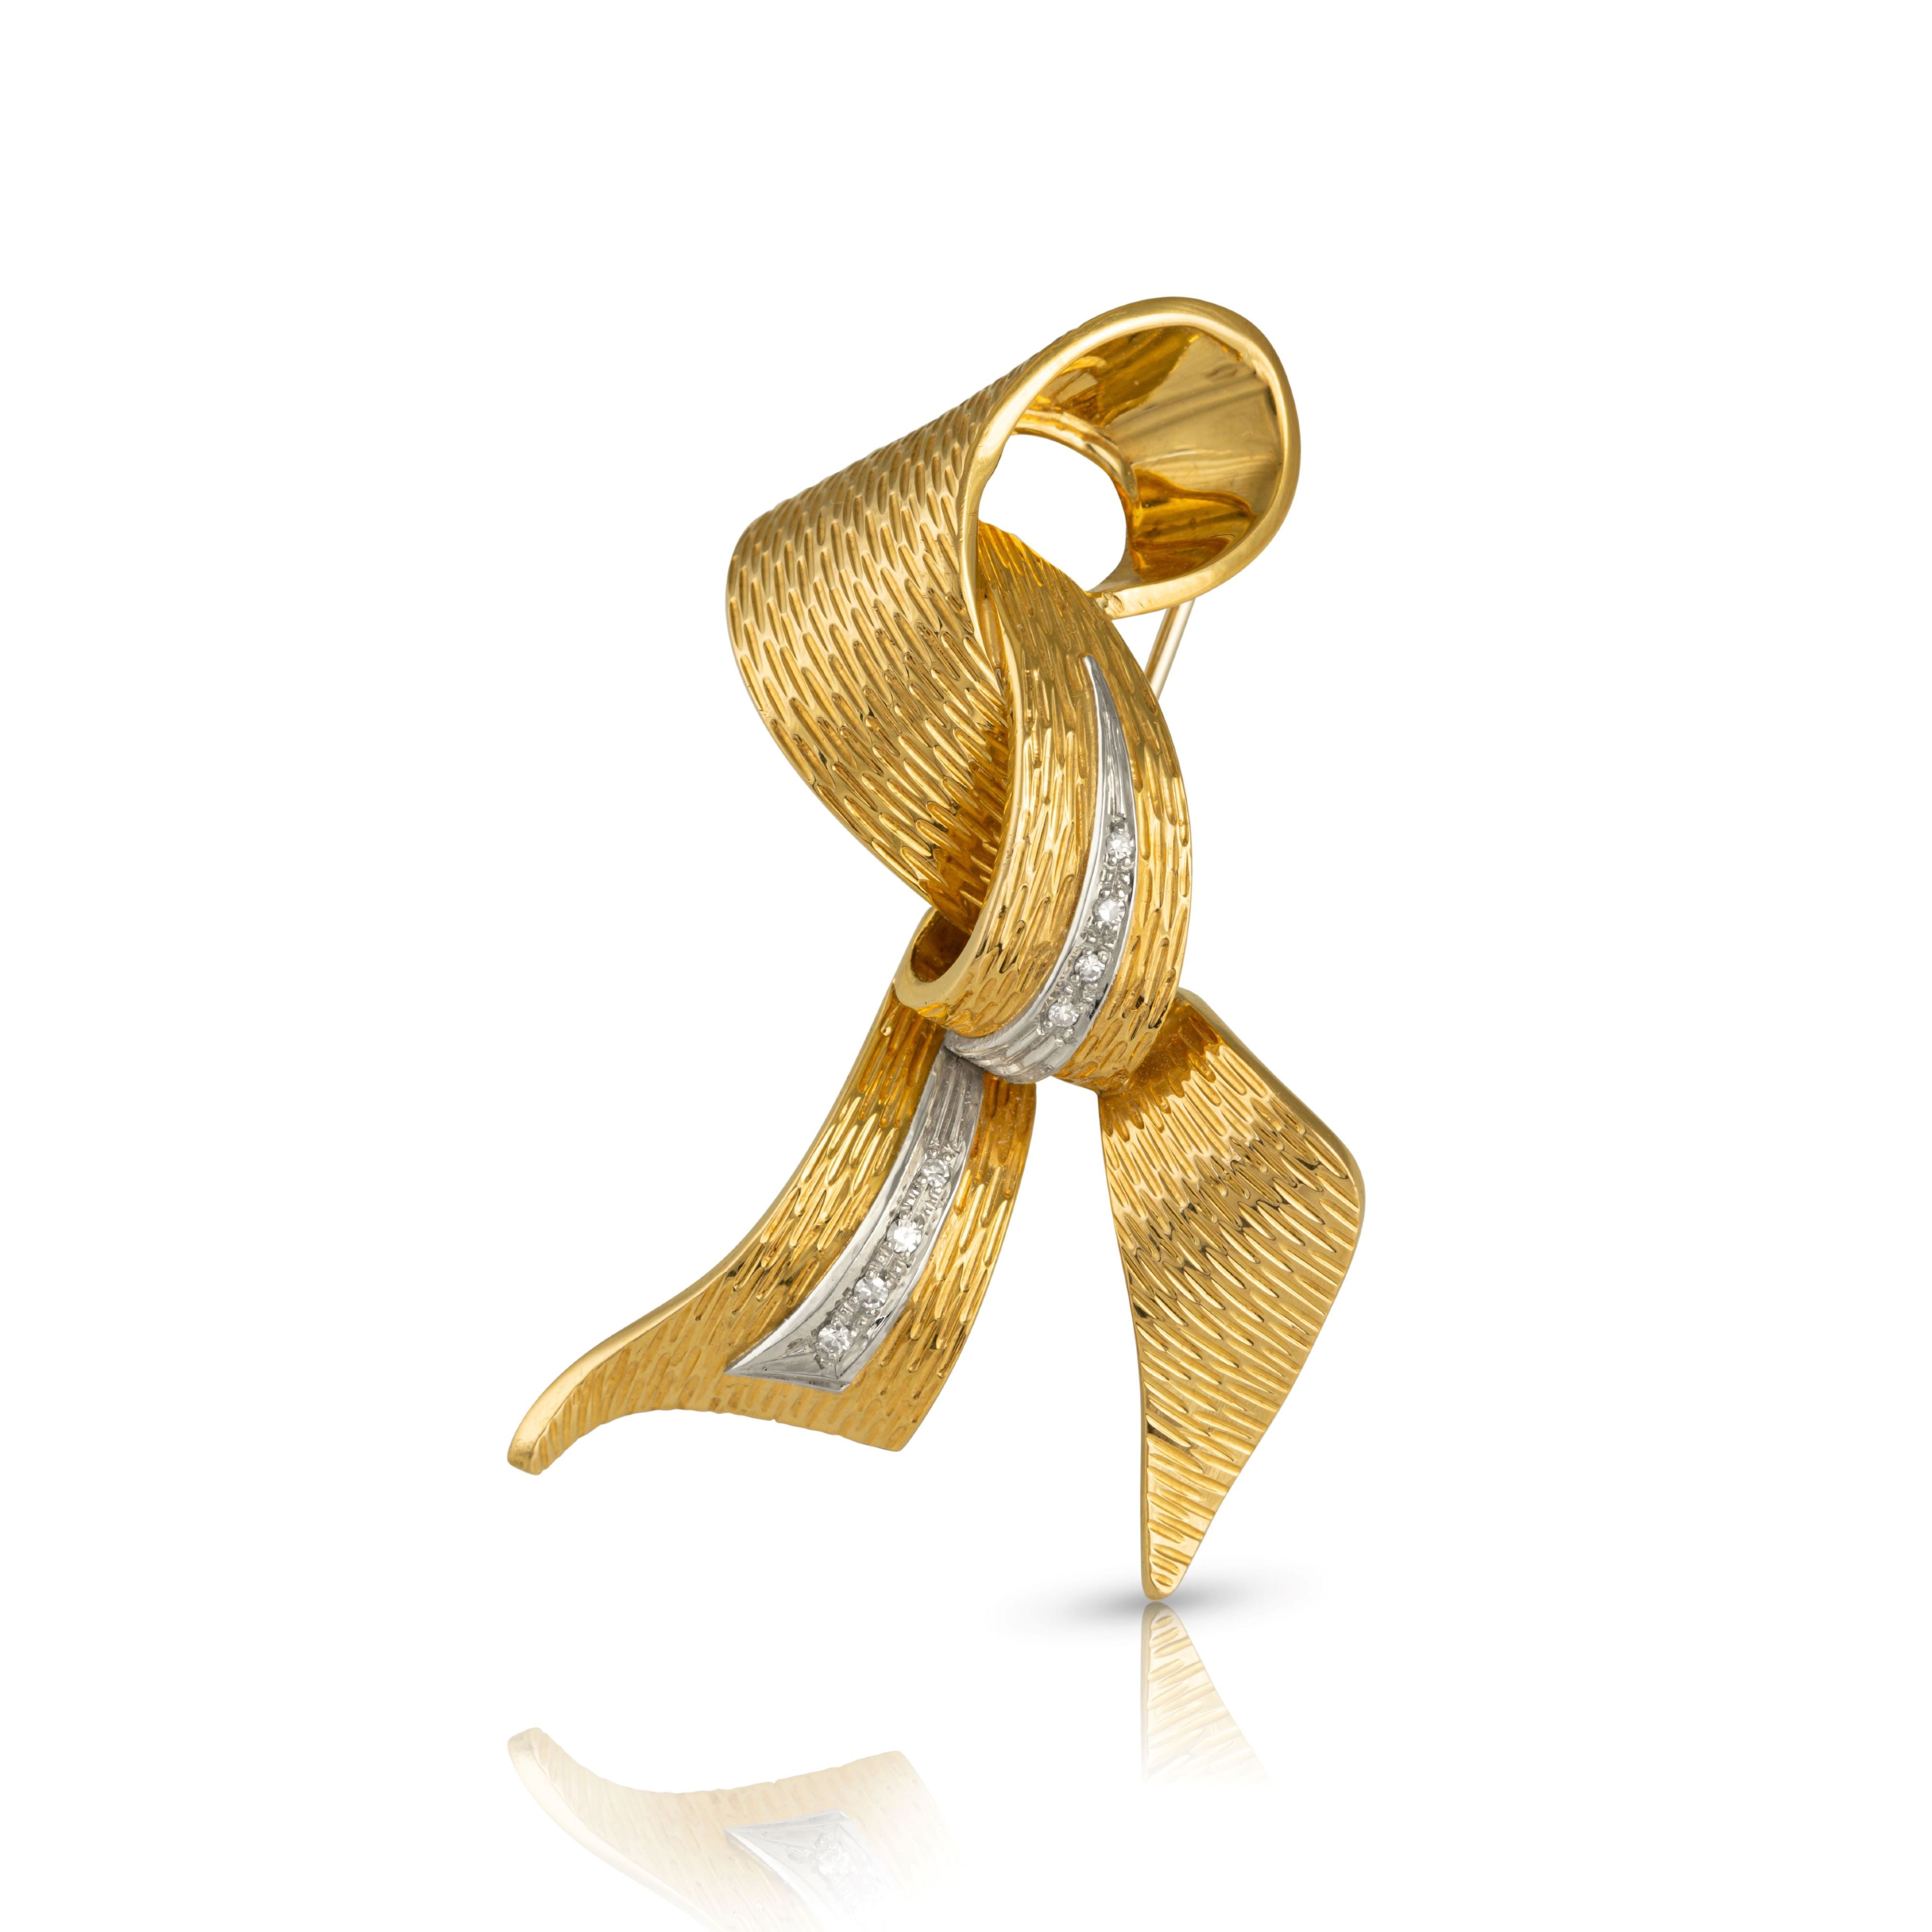 Vintage textured 18ct gold brooch with diamonds in ribbon motif from the 1960s.